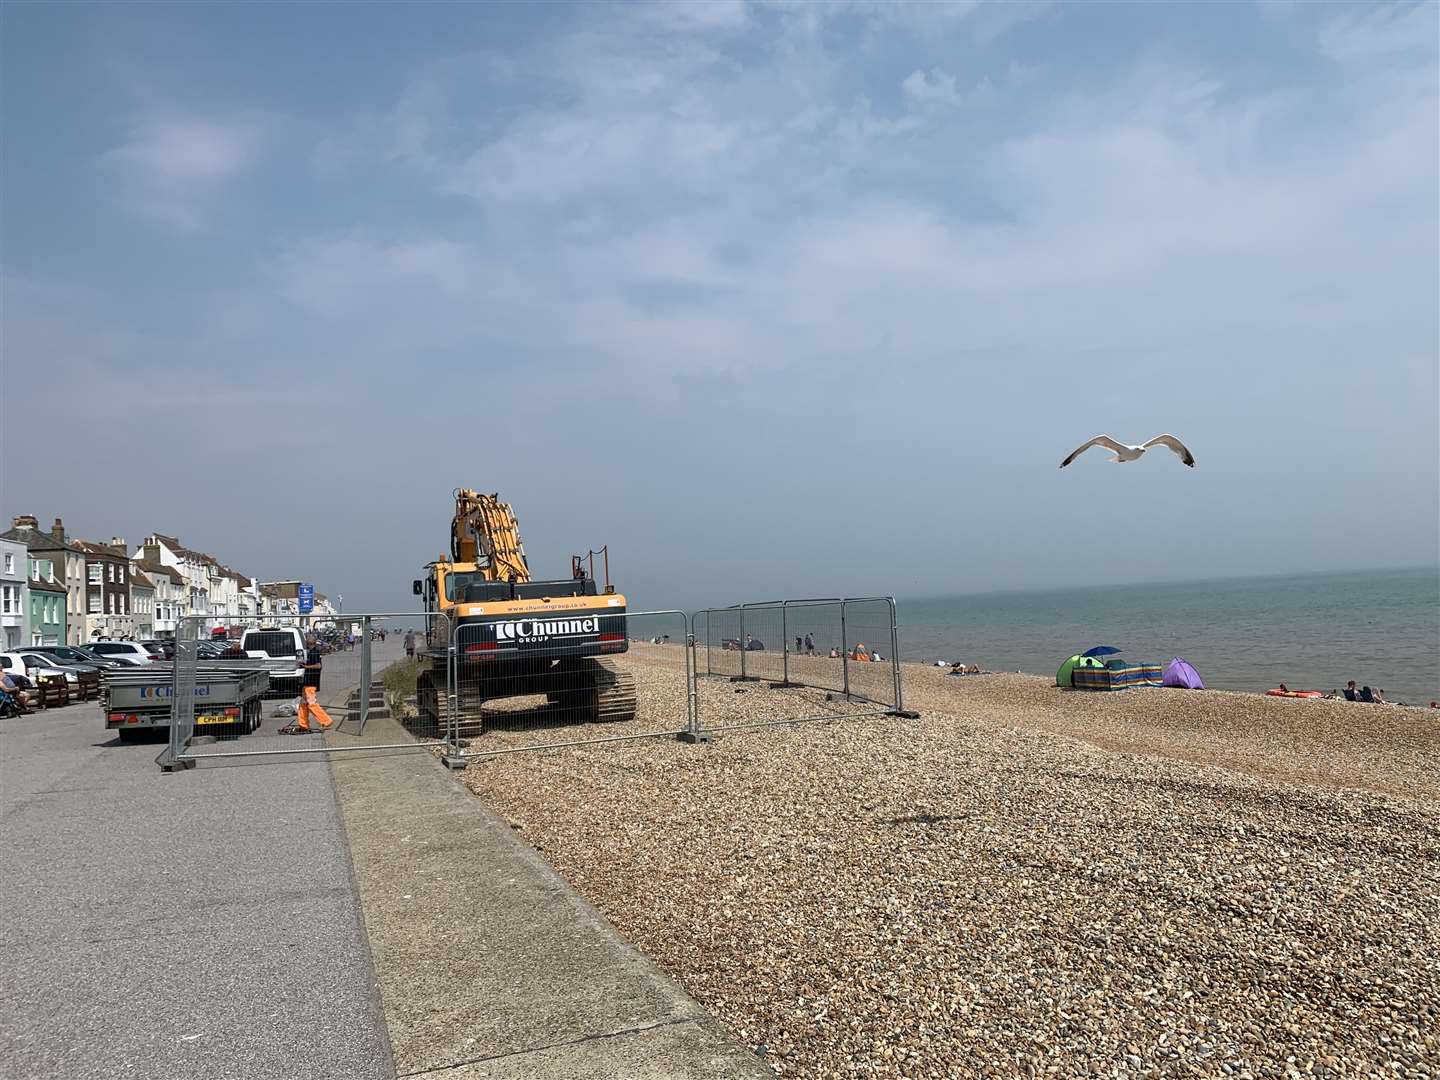 The £800k sea defence works were expected to start in late August but the first digger arrived today